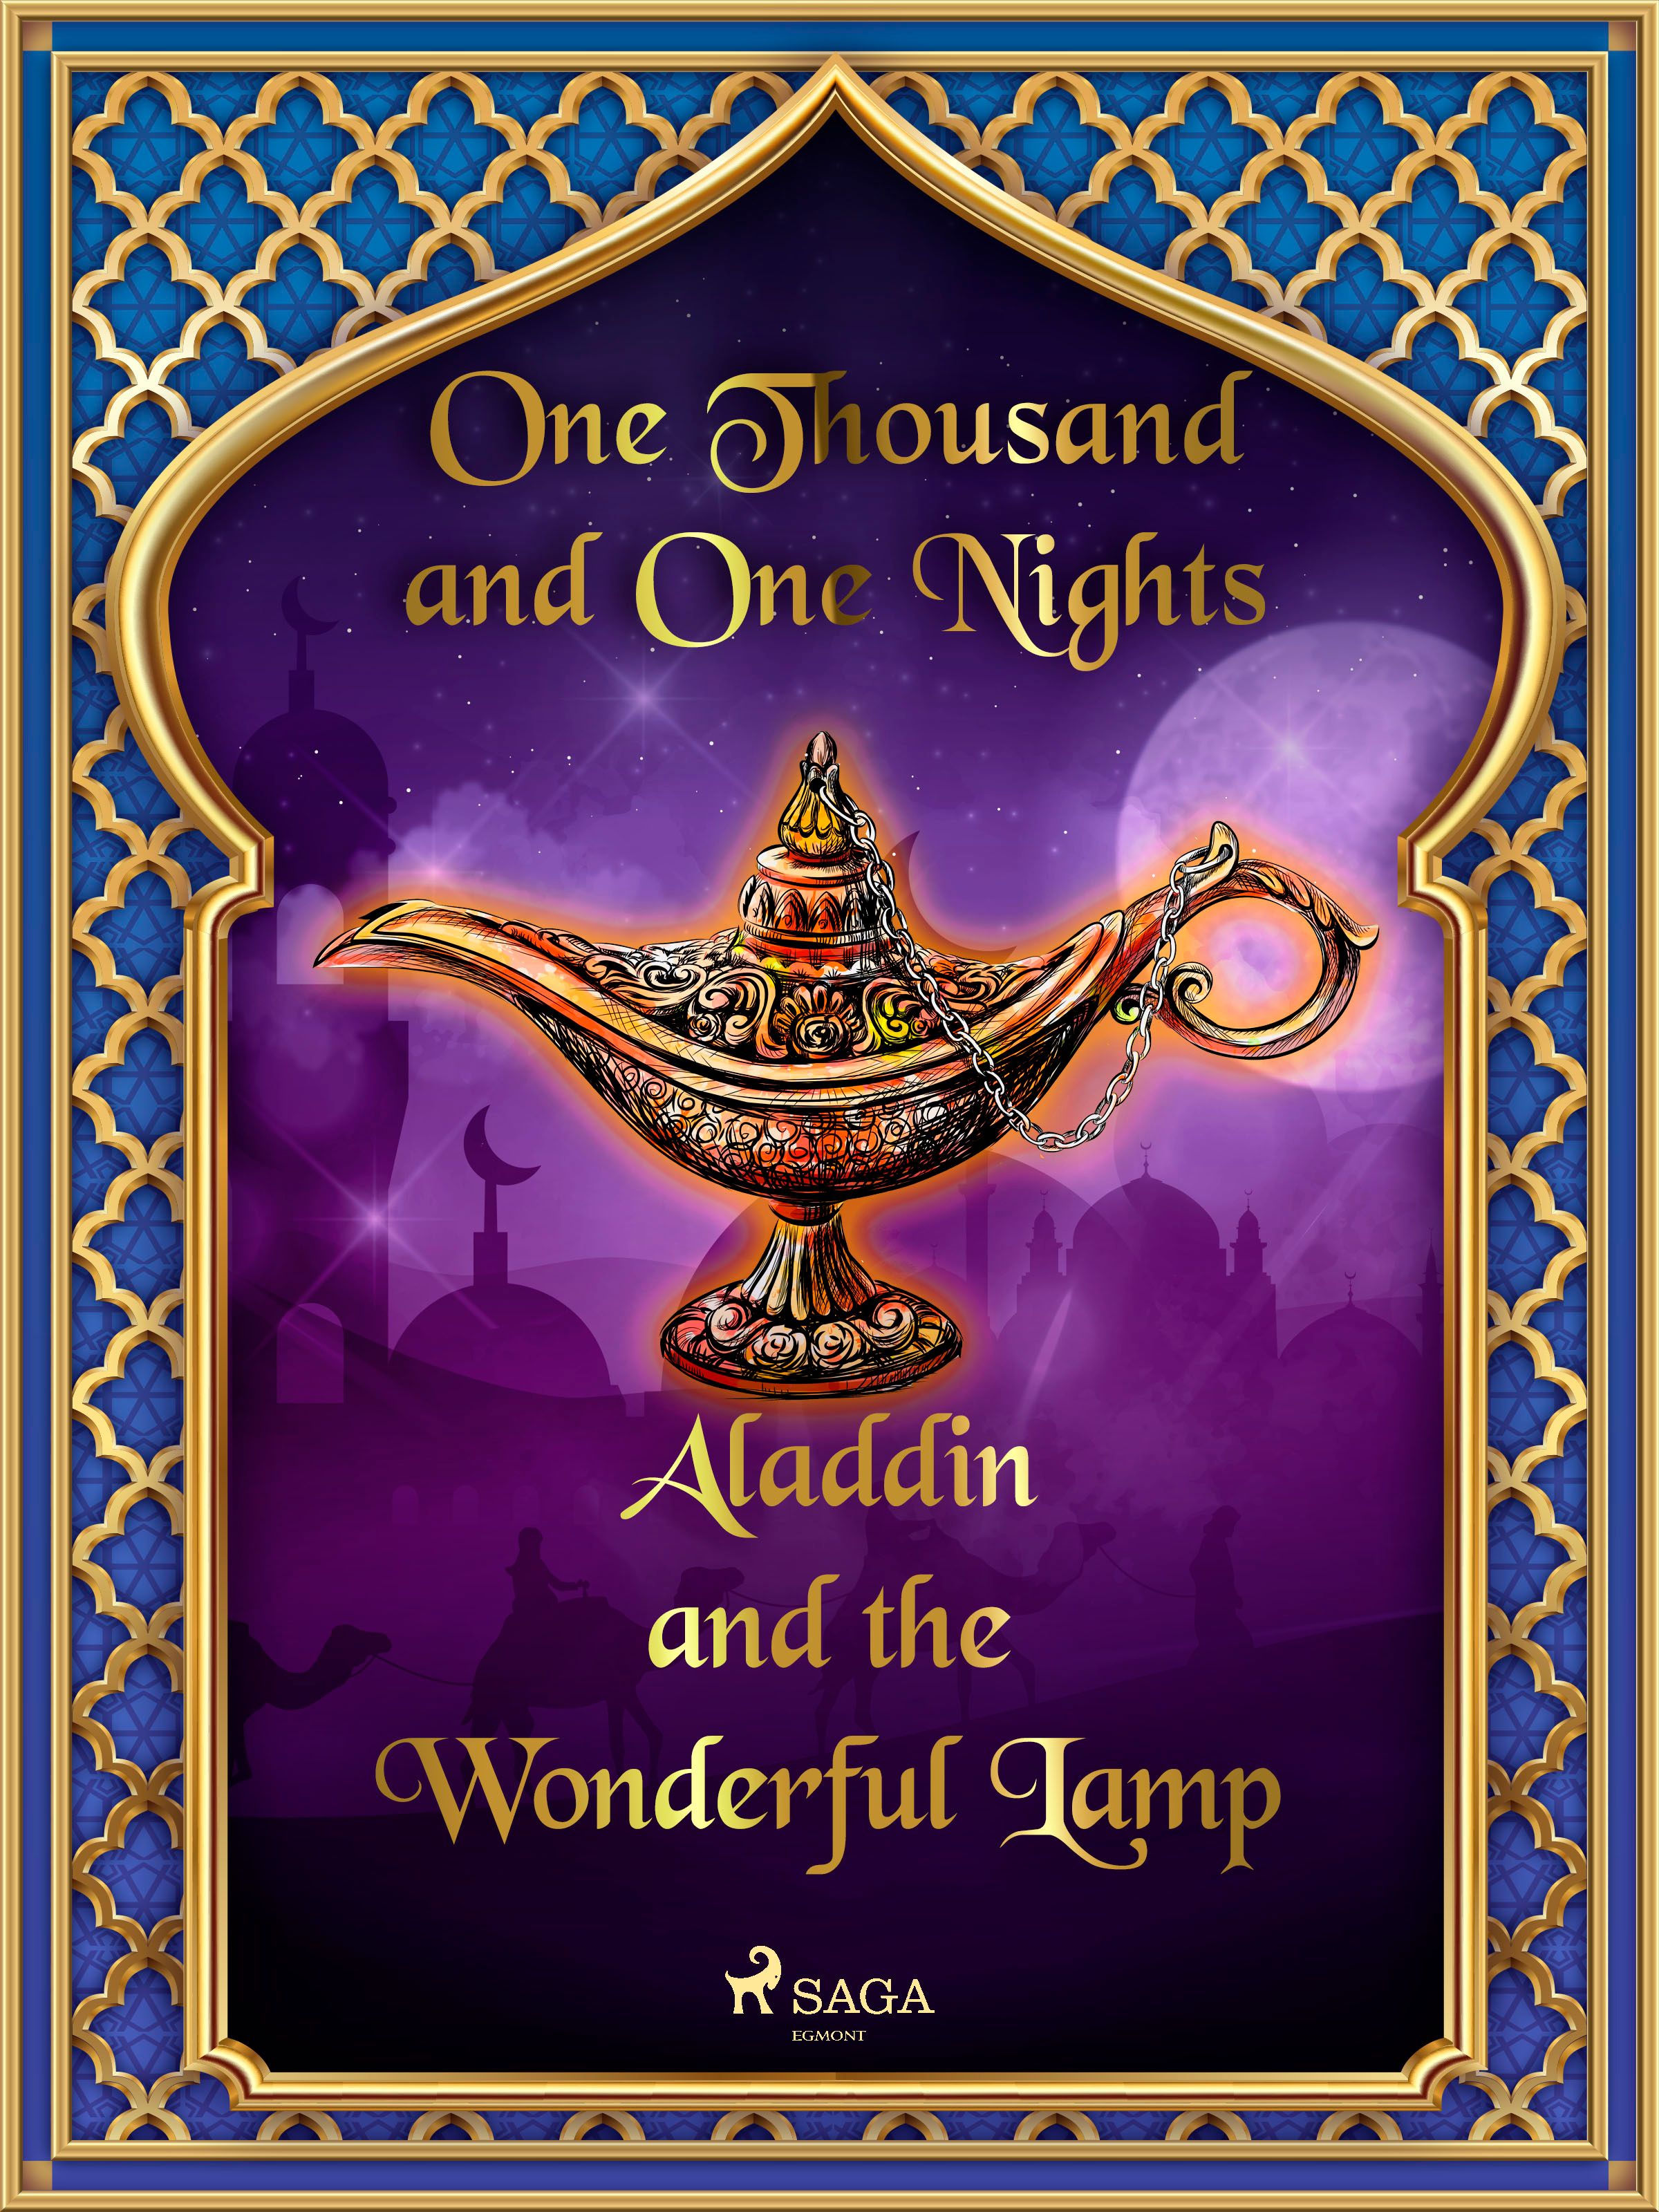 Aladdin and the Wonderful Lamp, e-bok av One Thousand and One Nights